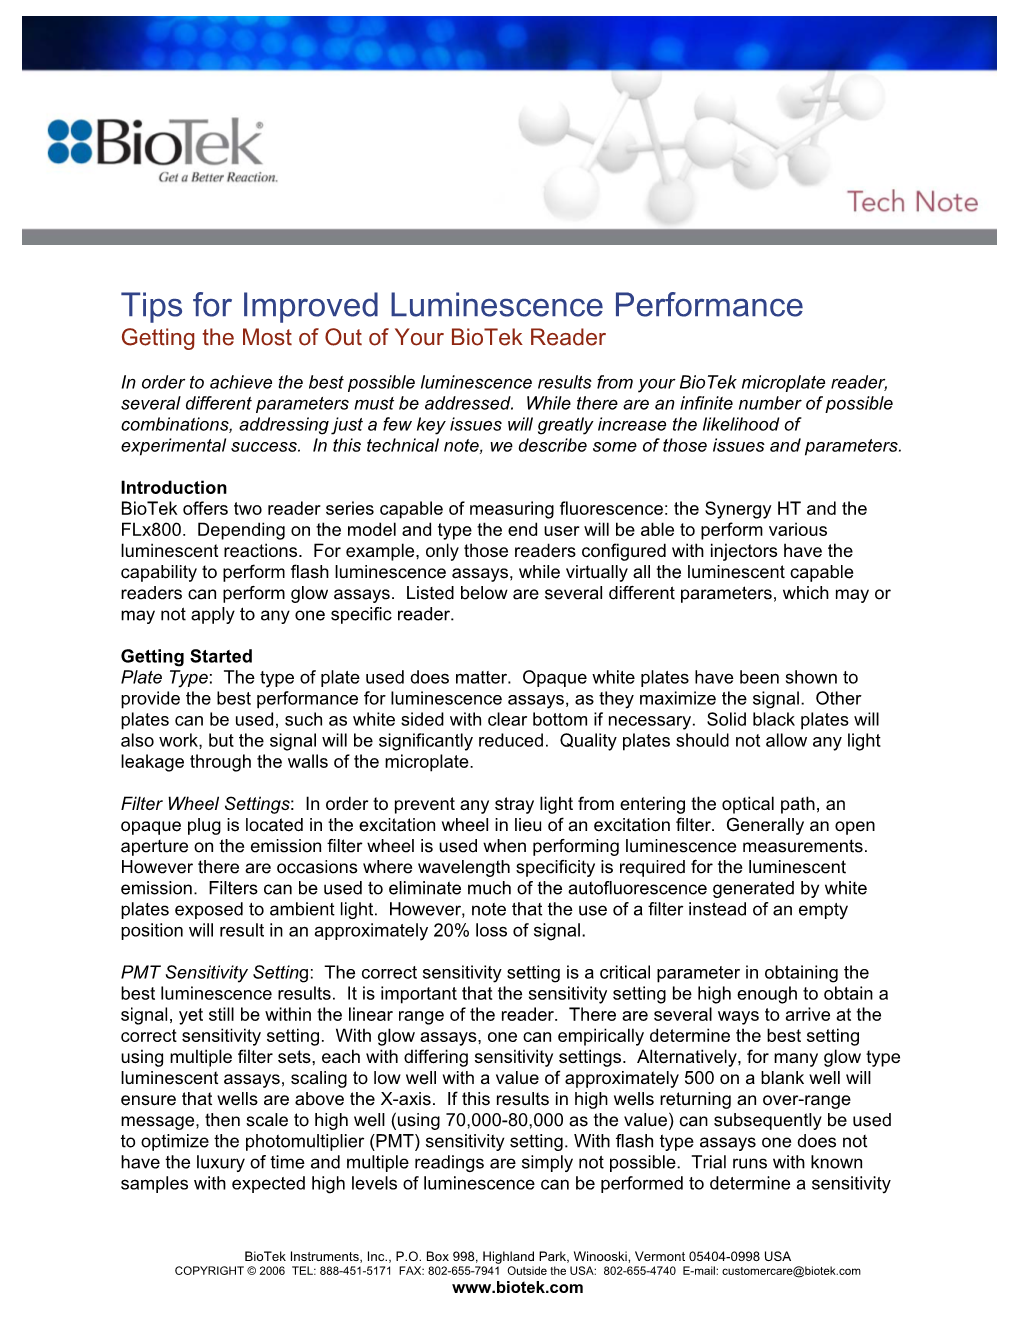 Tips for Improved Luminescence Performance Getting the Most of out of Your Biotek Reader